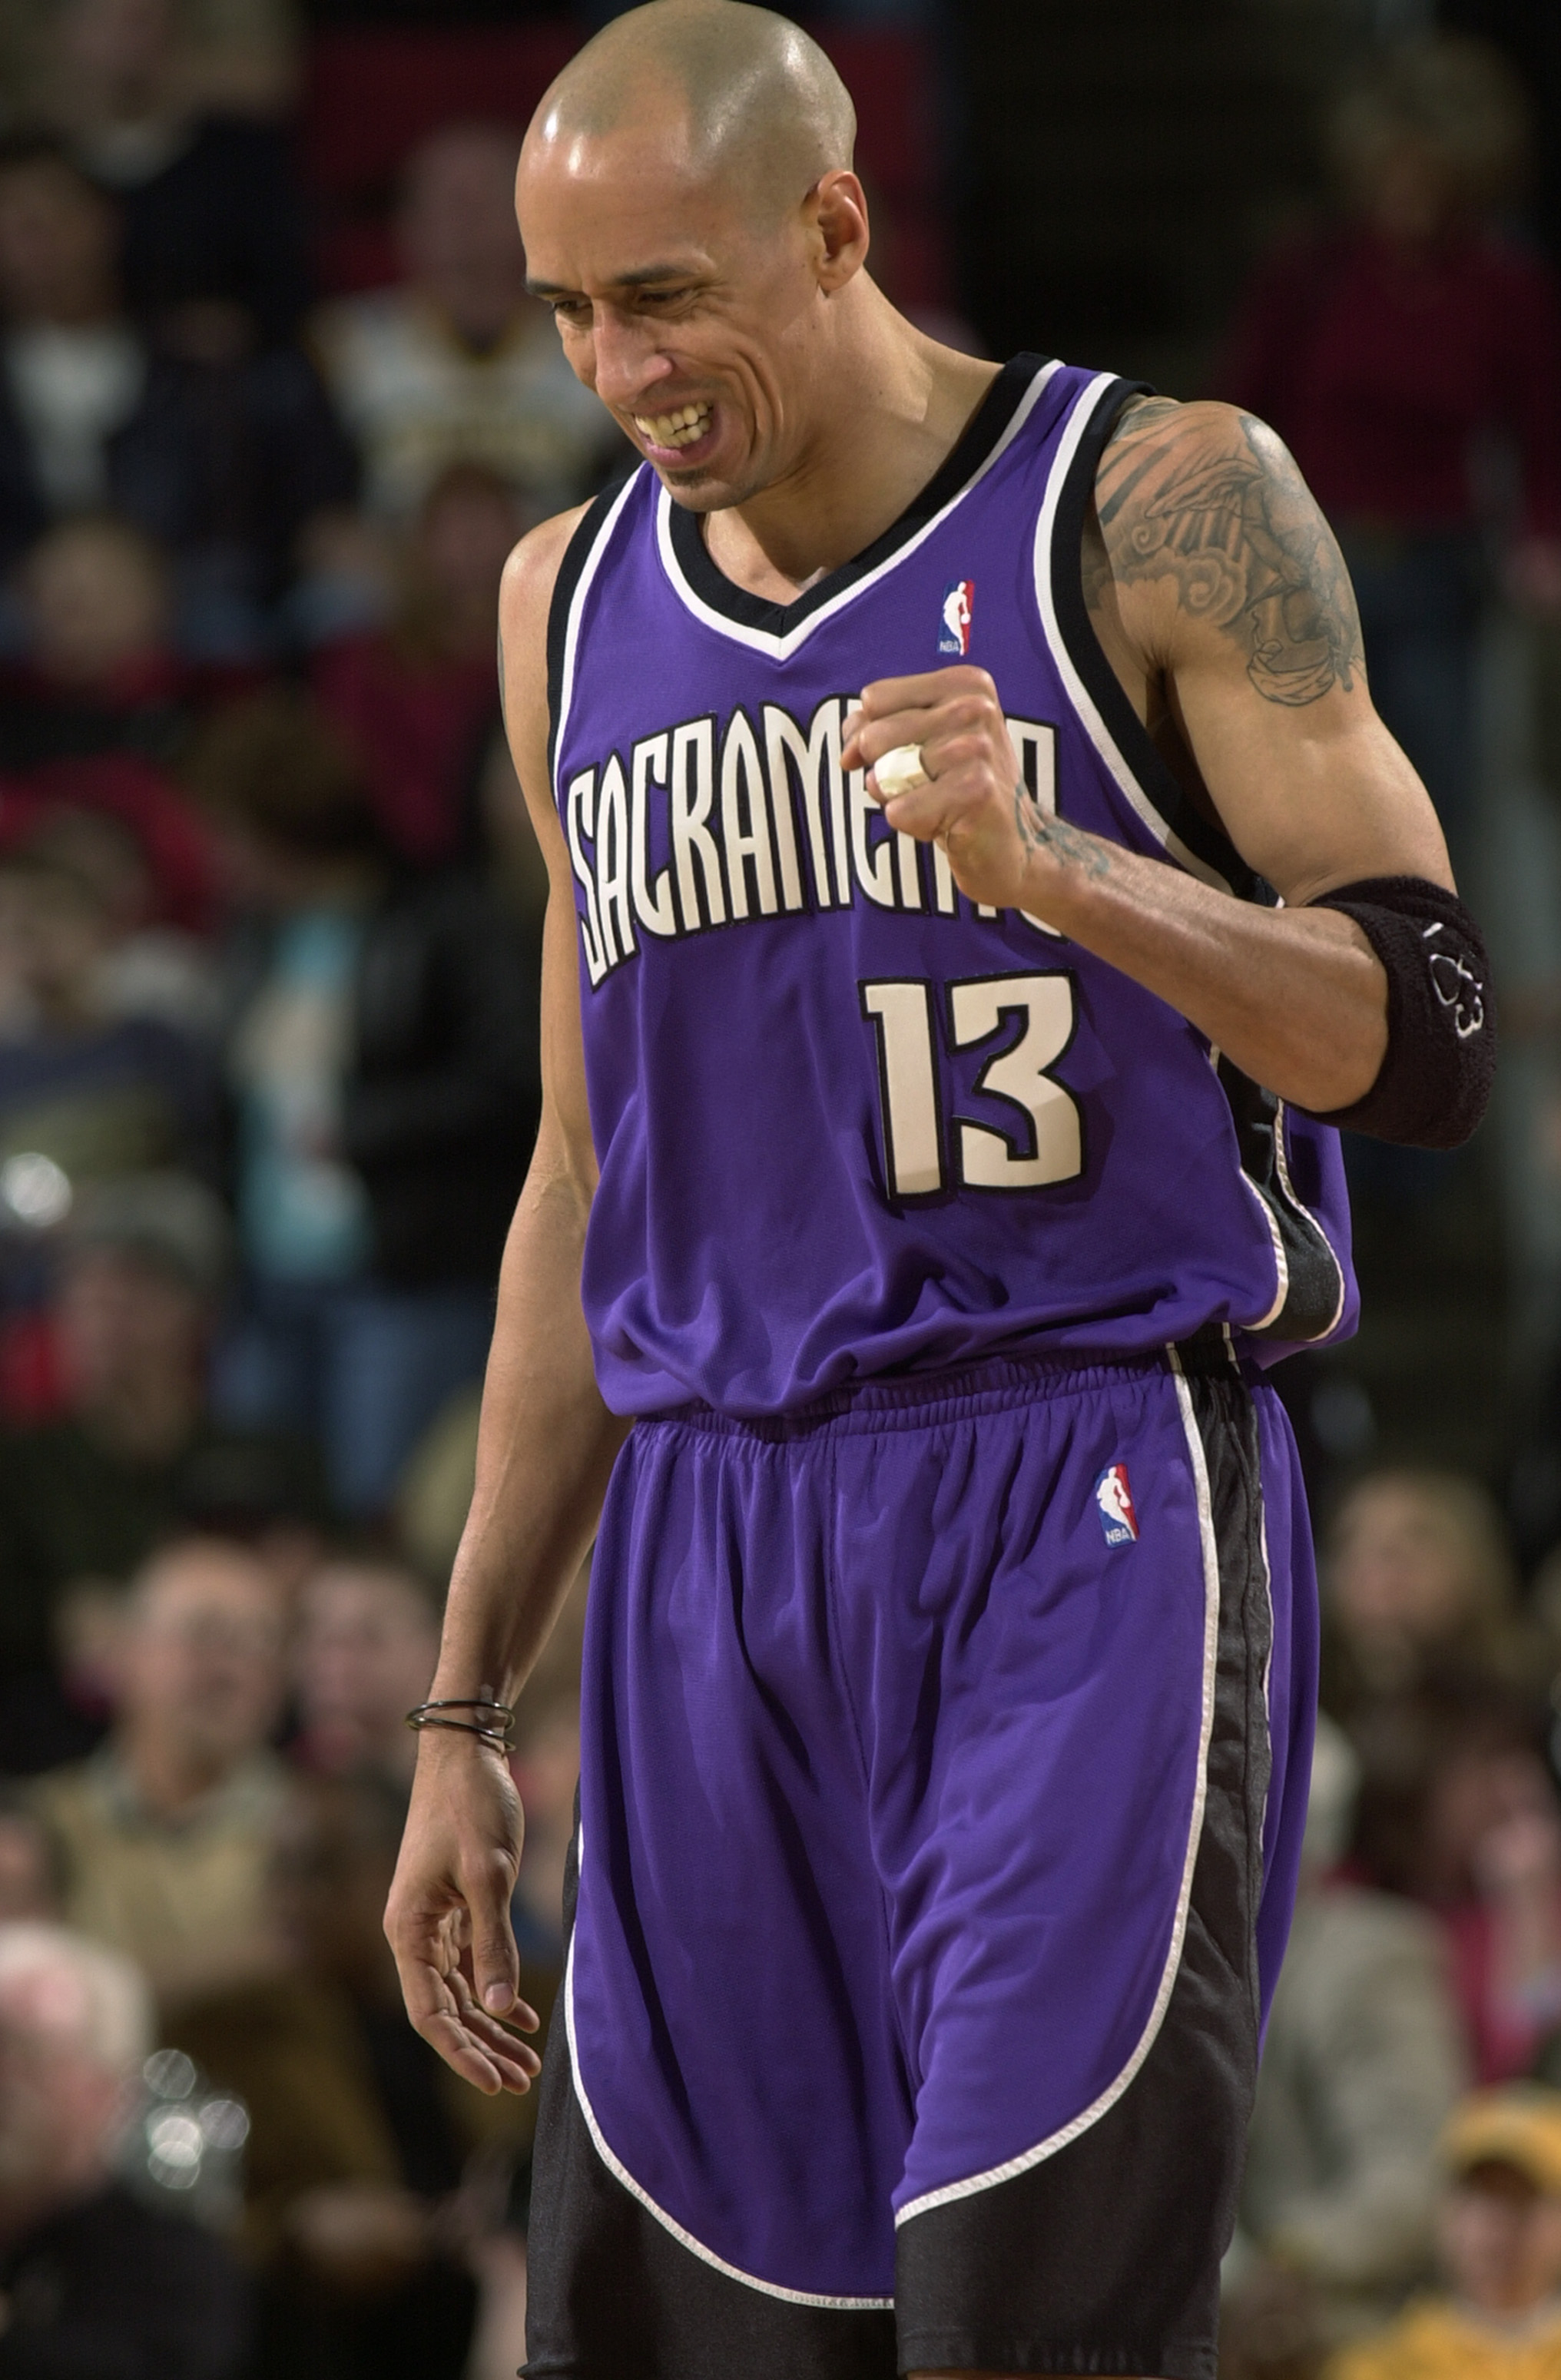 SEATTLE - JANUARY 31:  Doug Christie #13 of the Sacramento Kings during the game against the Seattle Sonics on January 31, 2004 at Key Arena in Seattle, Washington.  The Kings won 110-103.  NOTE TO USER: User expressly acknowledges and agrees that, by dow